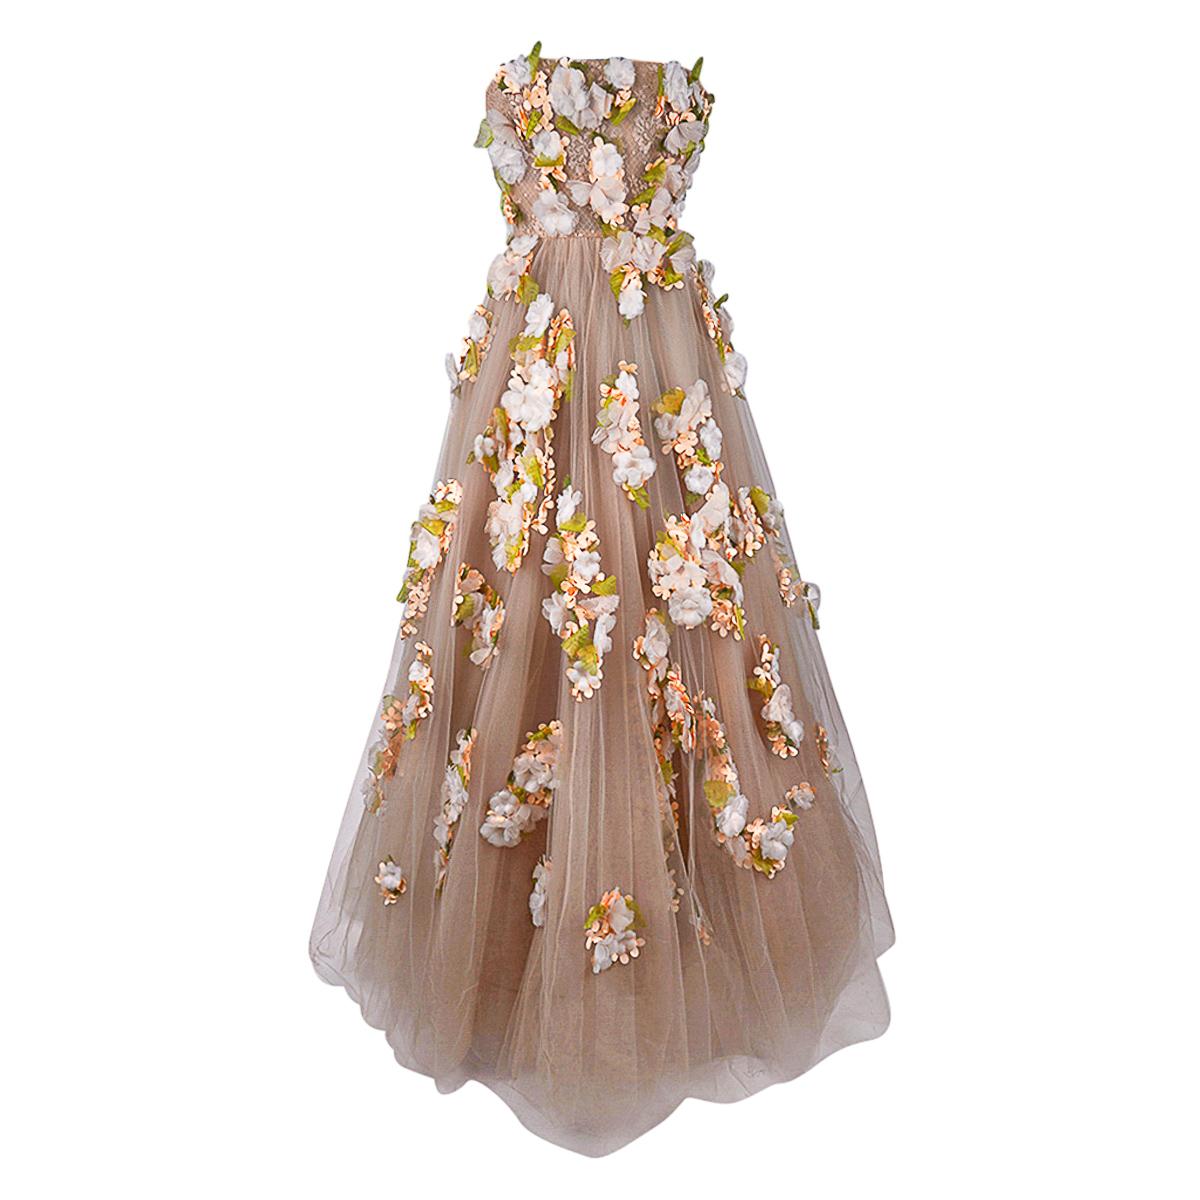 Valentino Strapless Empire Nude Flower Adorned Gown 1 of 2 Size 0 6